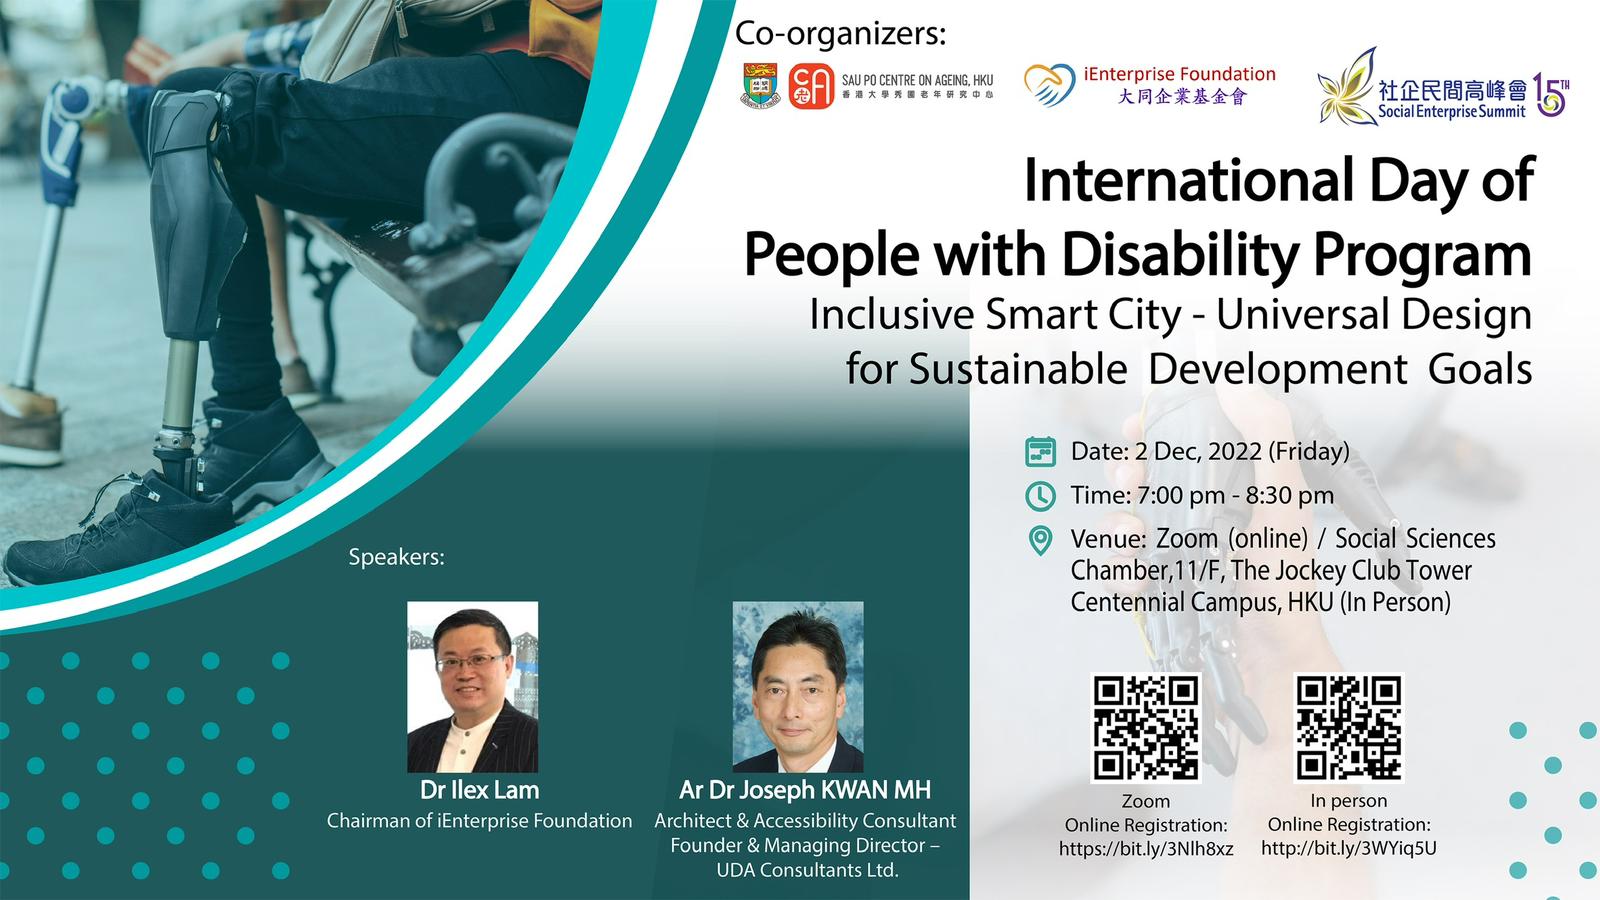 The poster for “International Day of People with Disability Program: Inclusive Smart City – Universal Design for Sustainable Development Goals” in landscape form.